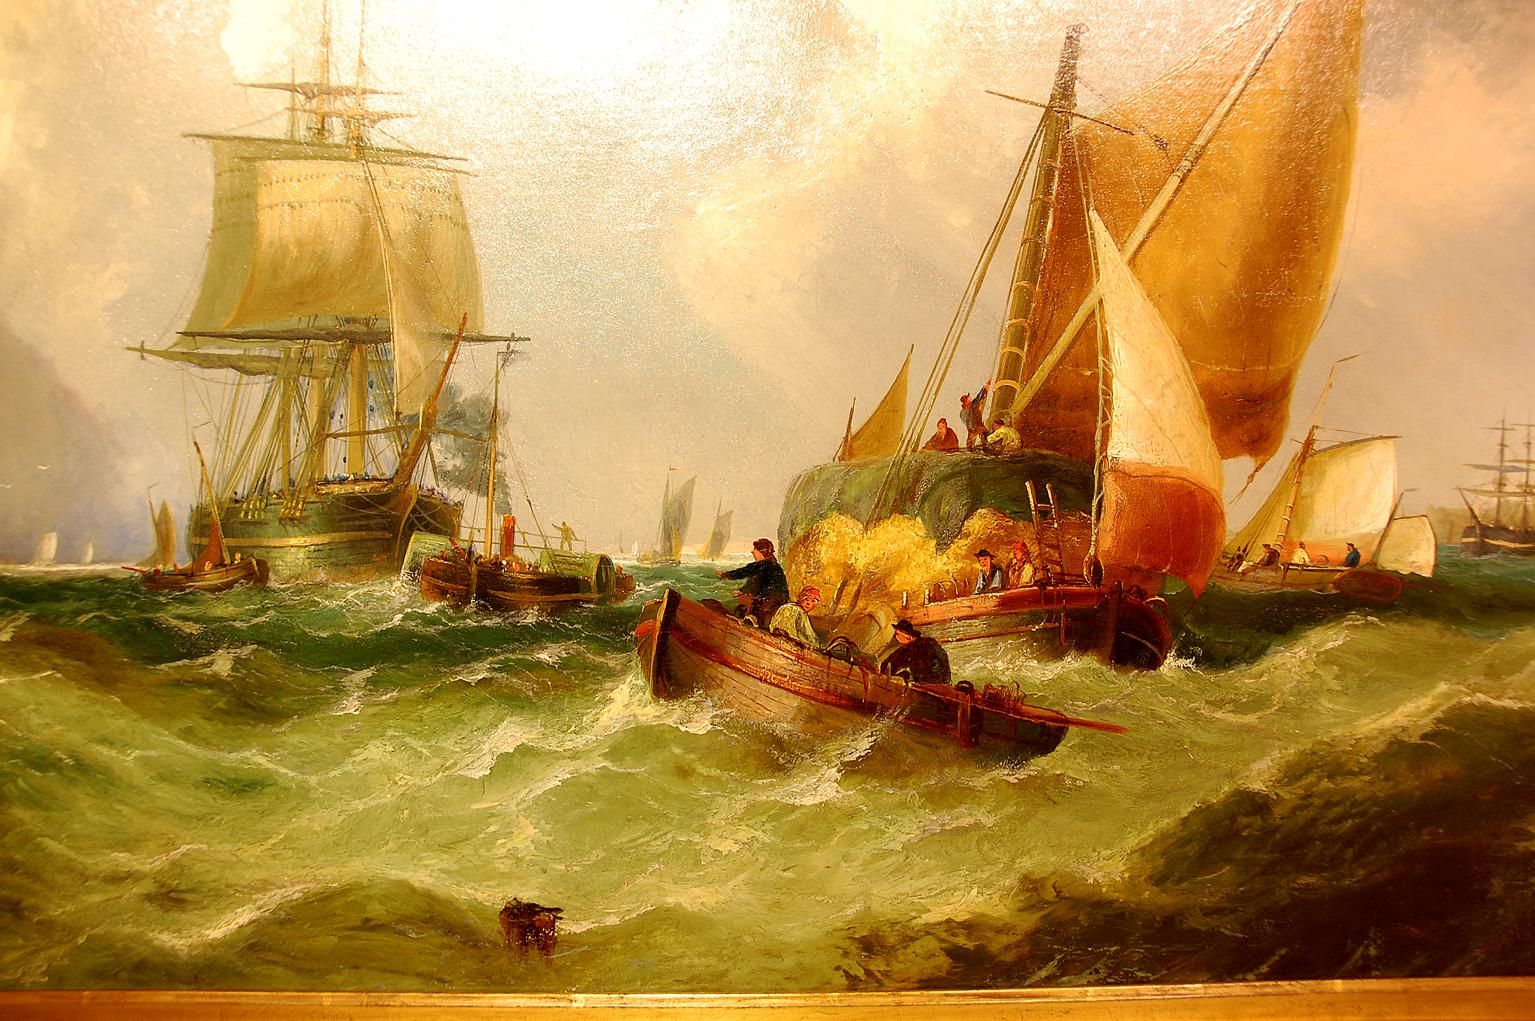 English original large oil painting on canvas signed: J(ohn) CALLOW in gold leaf frame. An exciting marine scene of working and sailing ships in choppy water with the coast of England in the background. Relined and restored as needed, circa